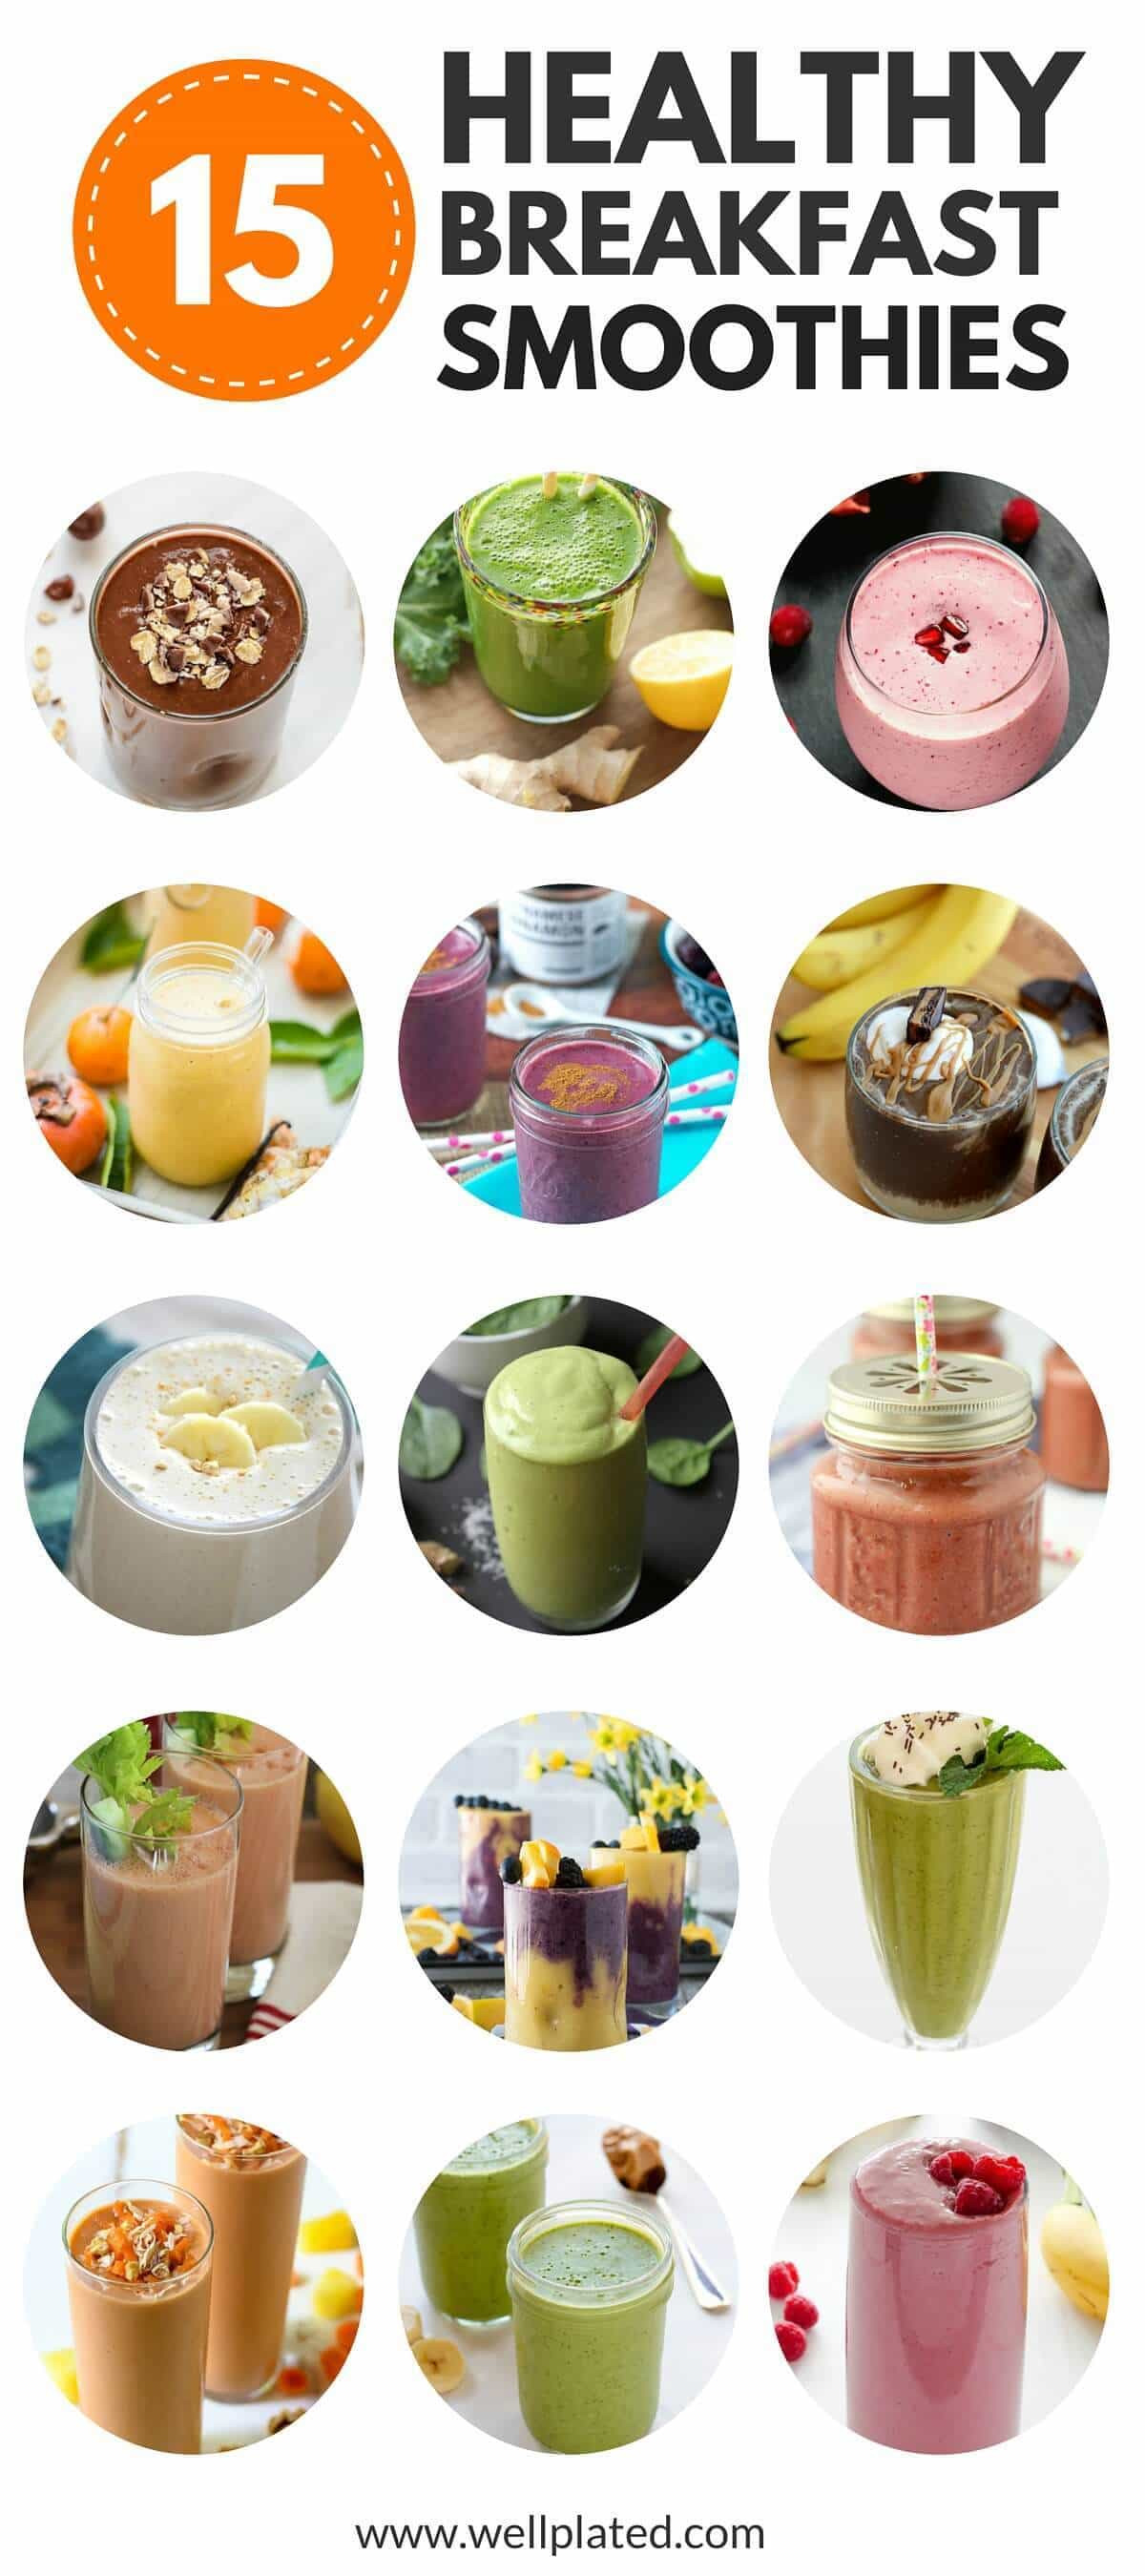 Healthy Breakfast Smoothies For Weight Loss
 The Best 15 Healthy Breakfast Smoothies